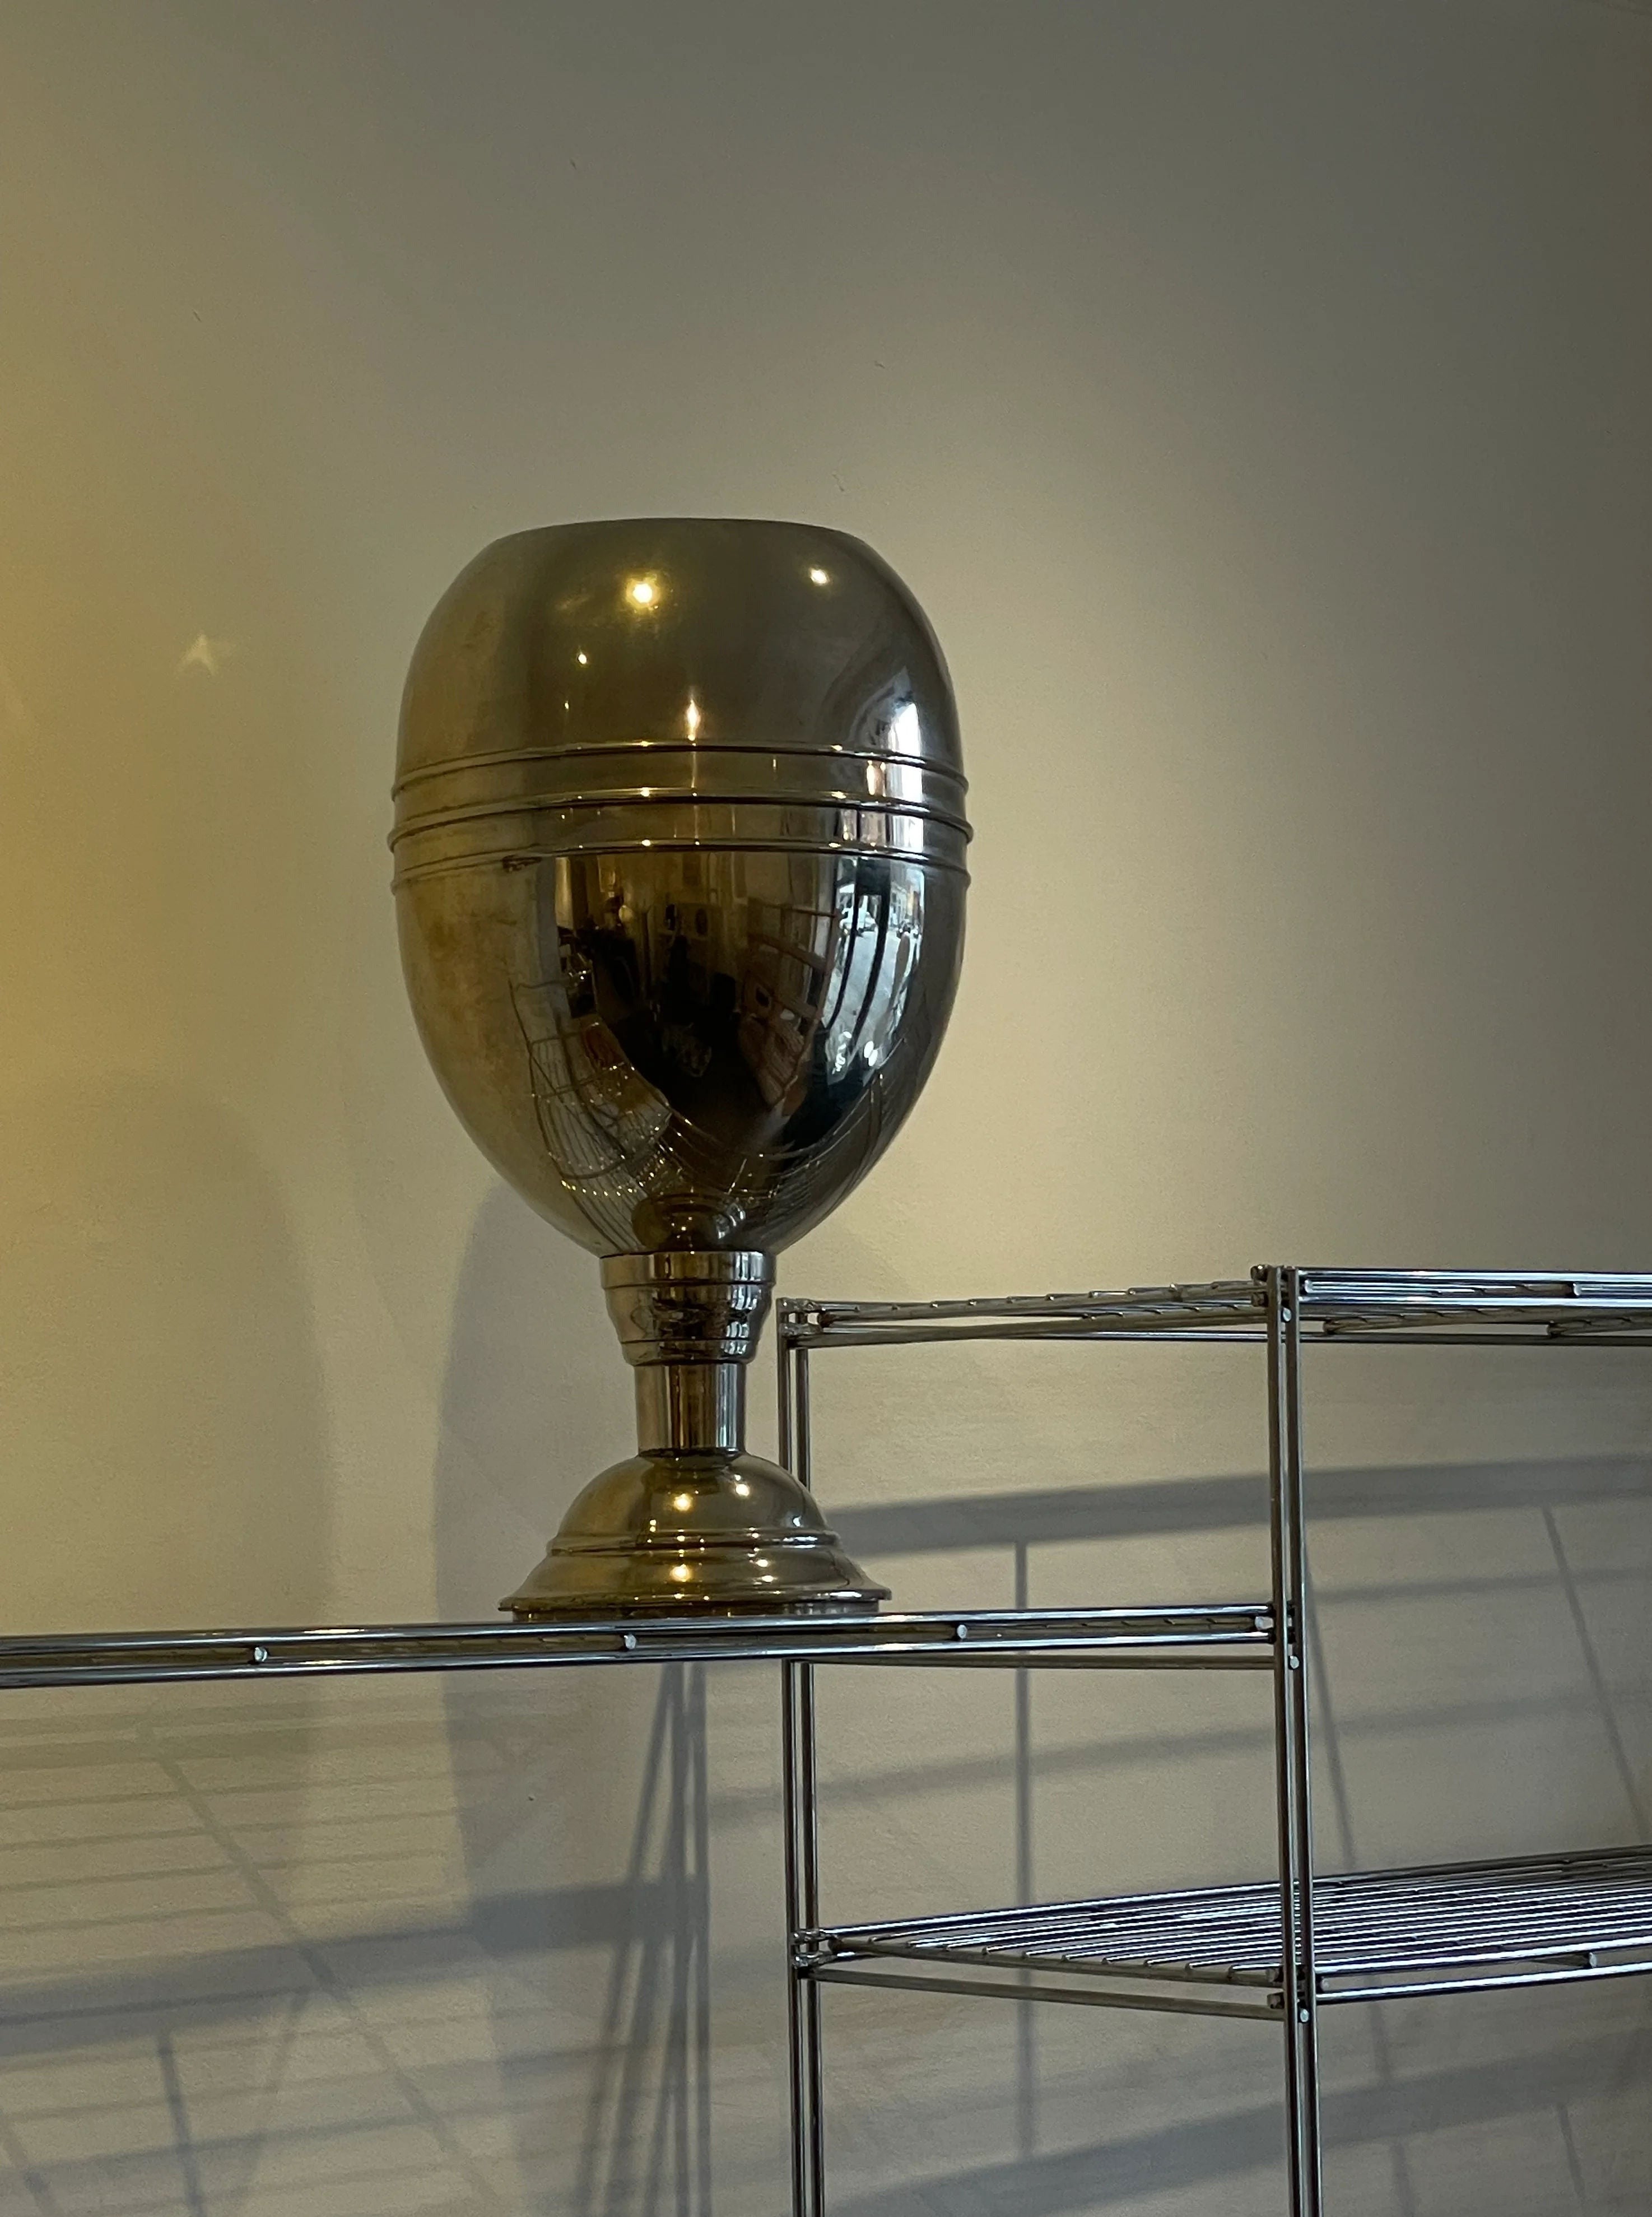 A large, shiny, steel trophy with a rounded cup and a slender base, sitting on a metal shelving unit against a plain wall.